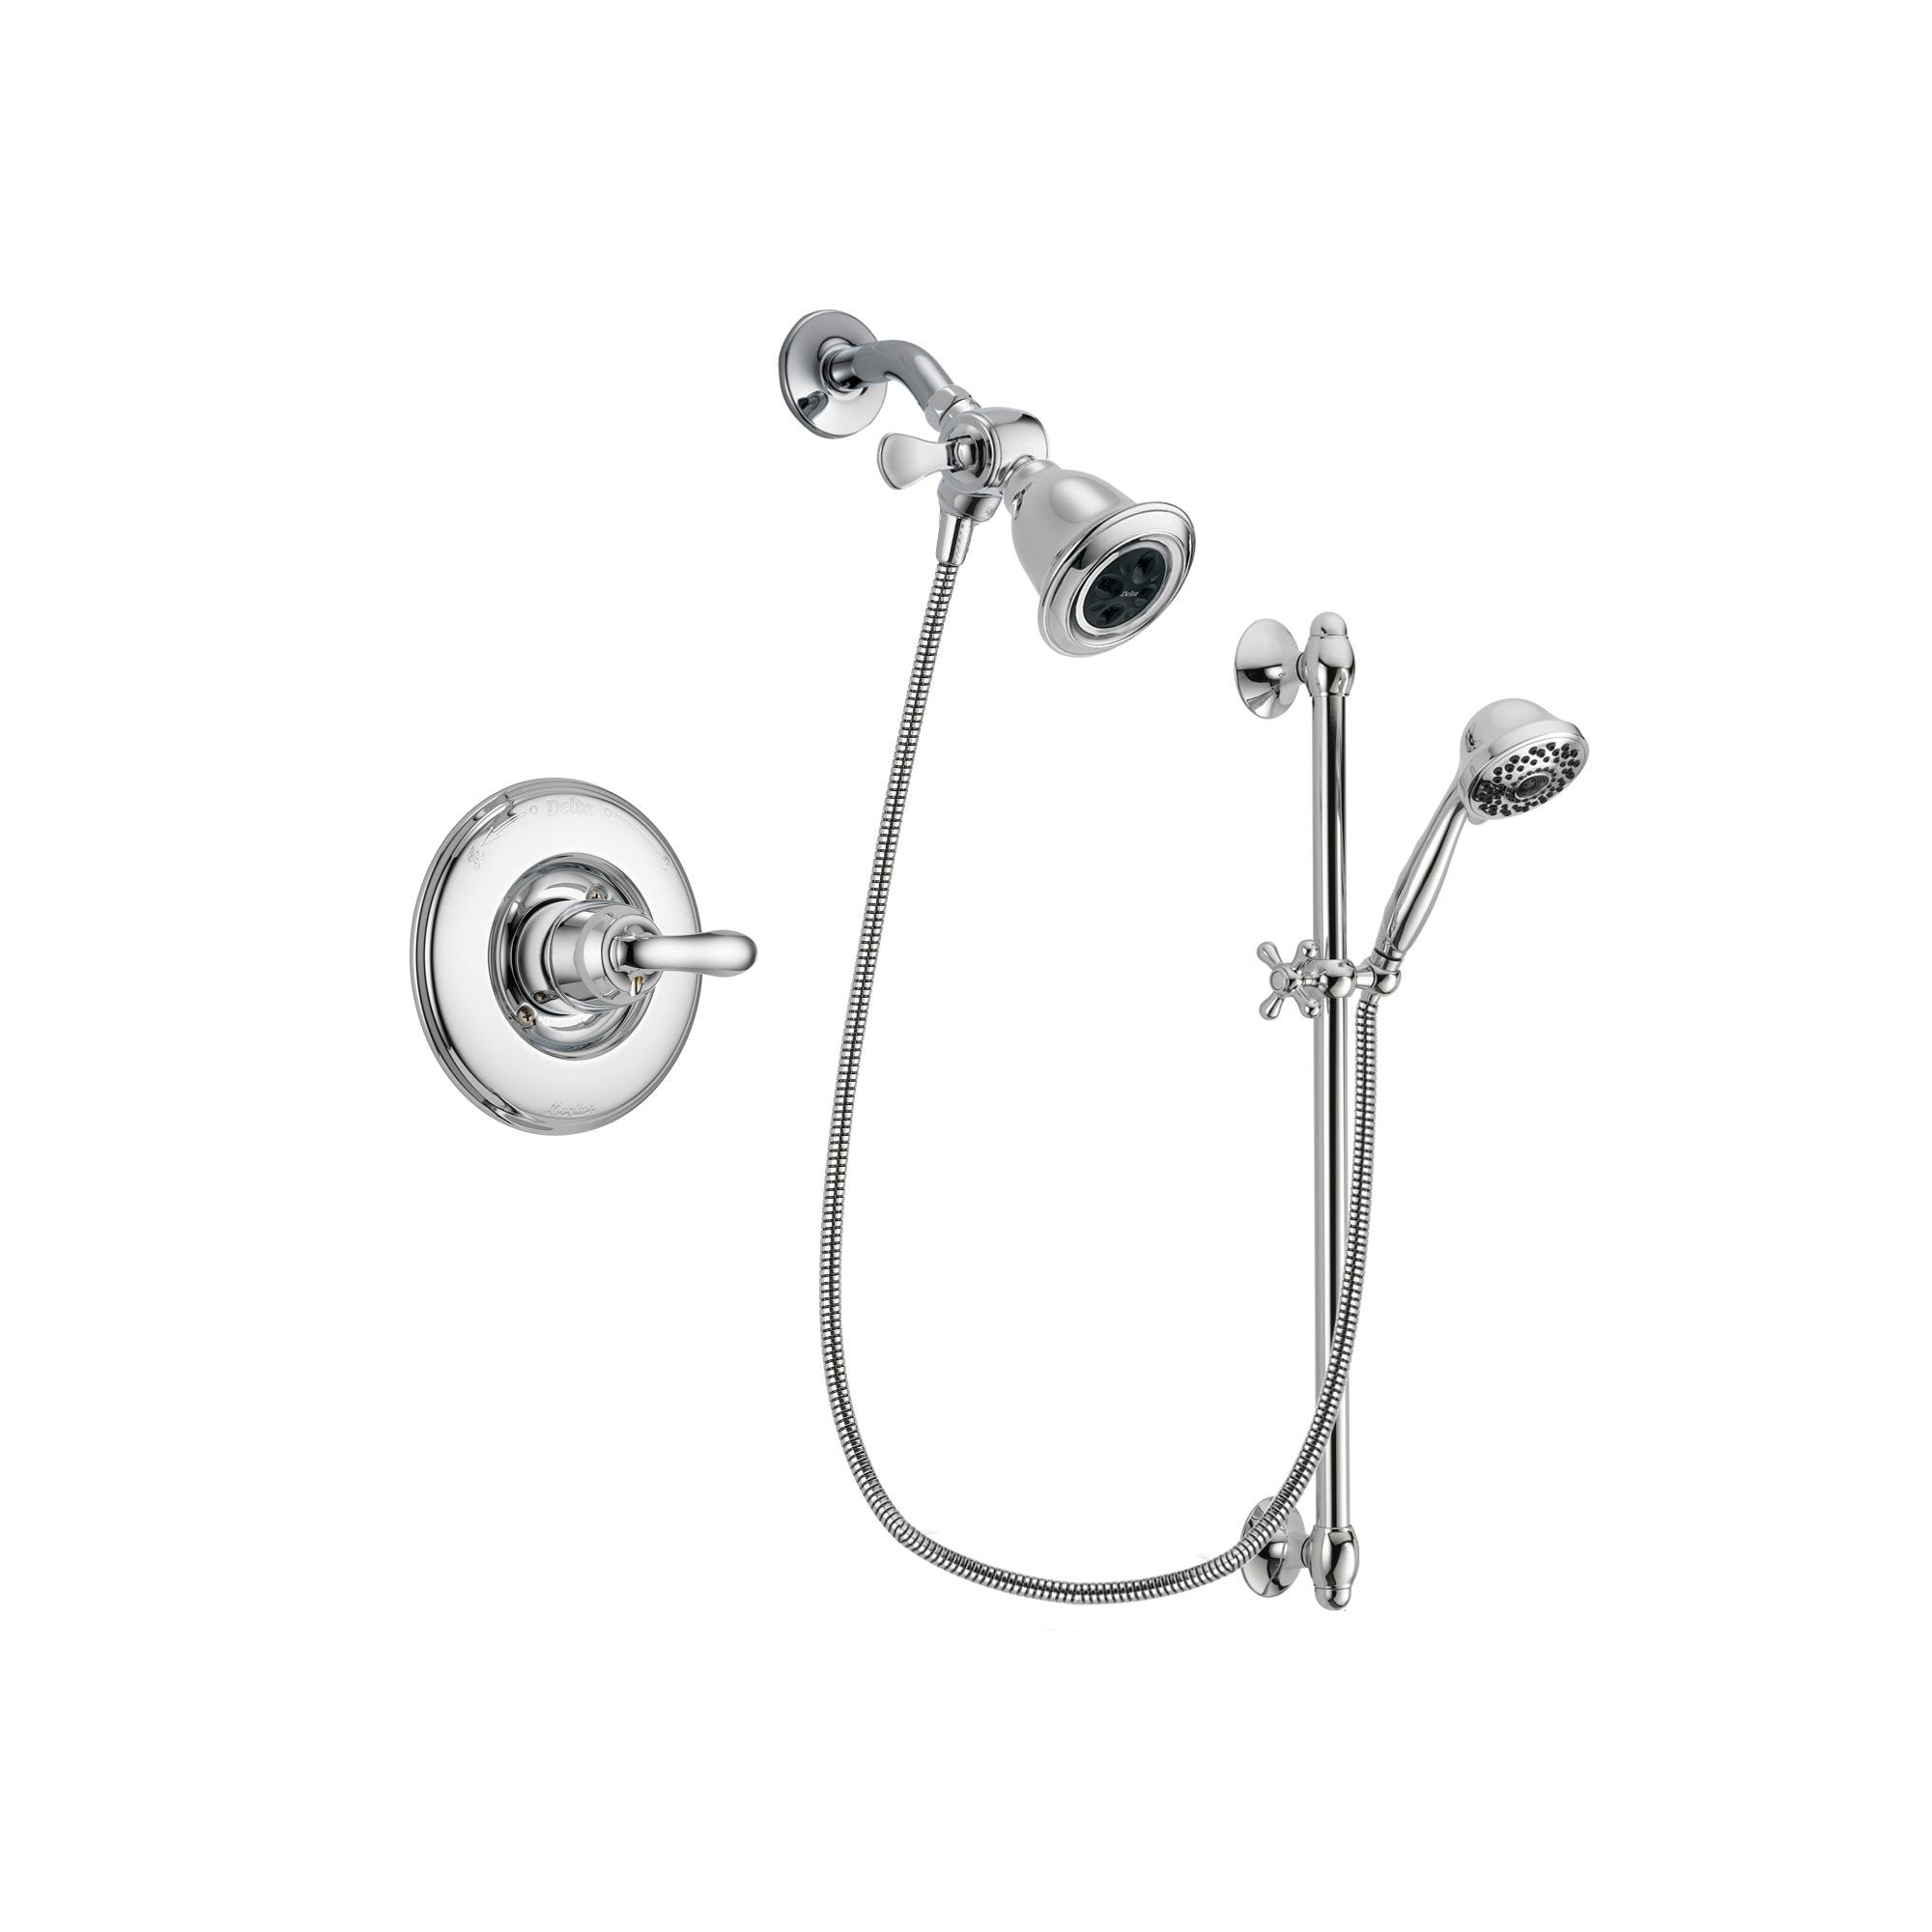 Delta Linden Chrome Finish Shower Faucet System Package with Water Efficient Showerhead and 7-Spray Handheld Shower Sprayer with Slide Bar Includes Rough-in Valve DSP0614V